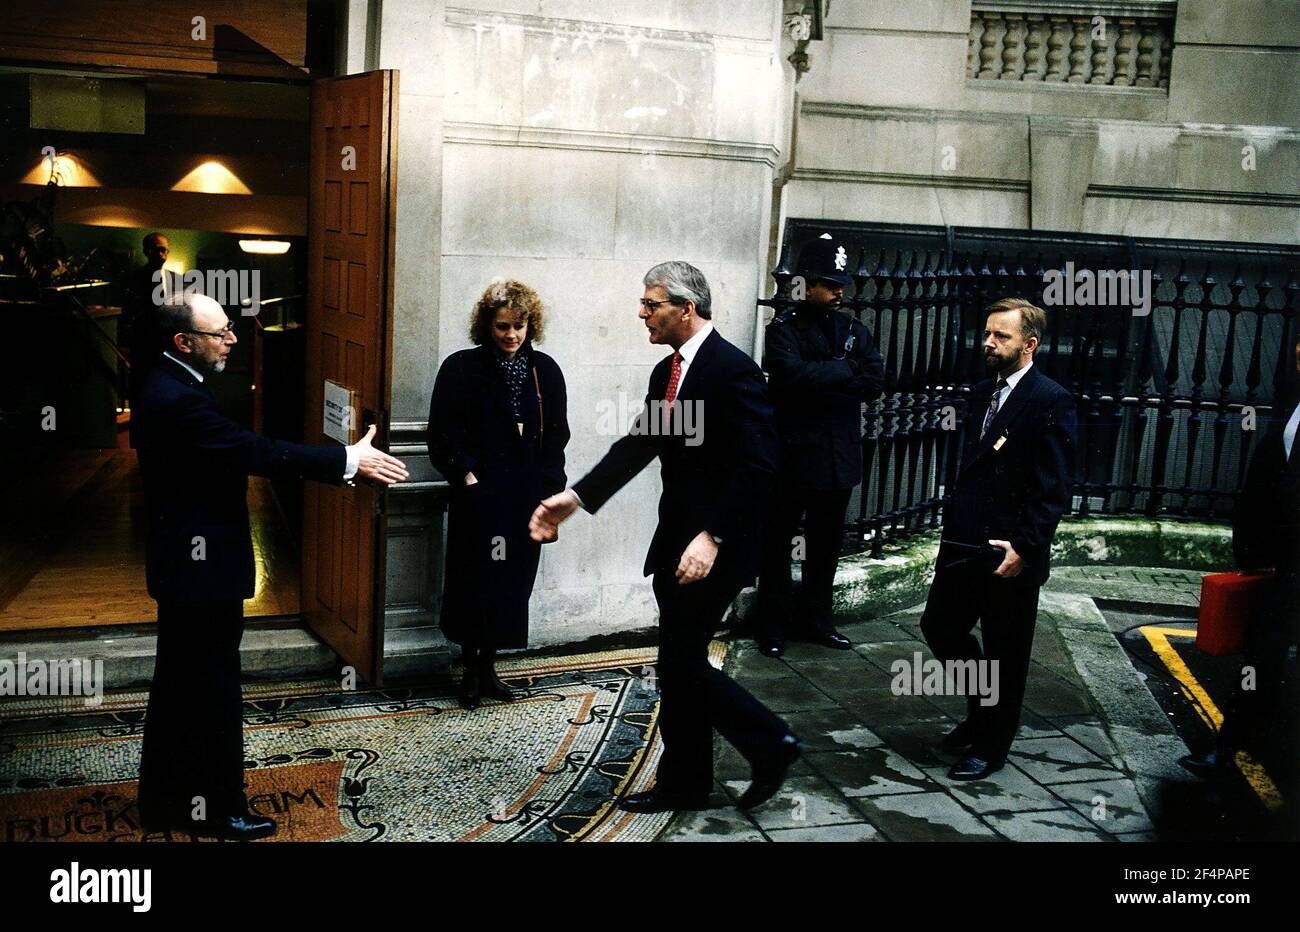 John Major MP the British Prime Minister arriving at the Scott Inquiry to give evidence being welcomed by David Price one of the inquiry team Dbase Stock Photo